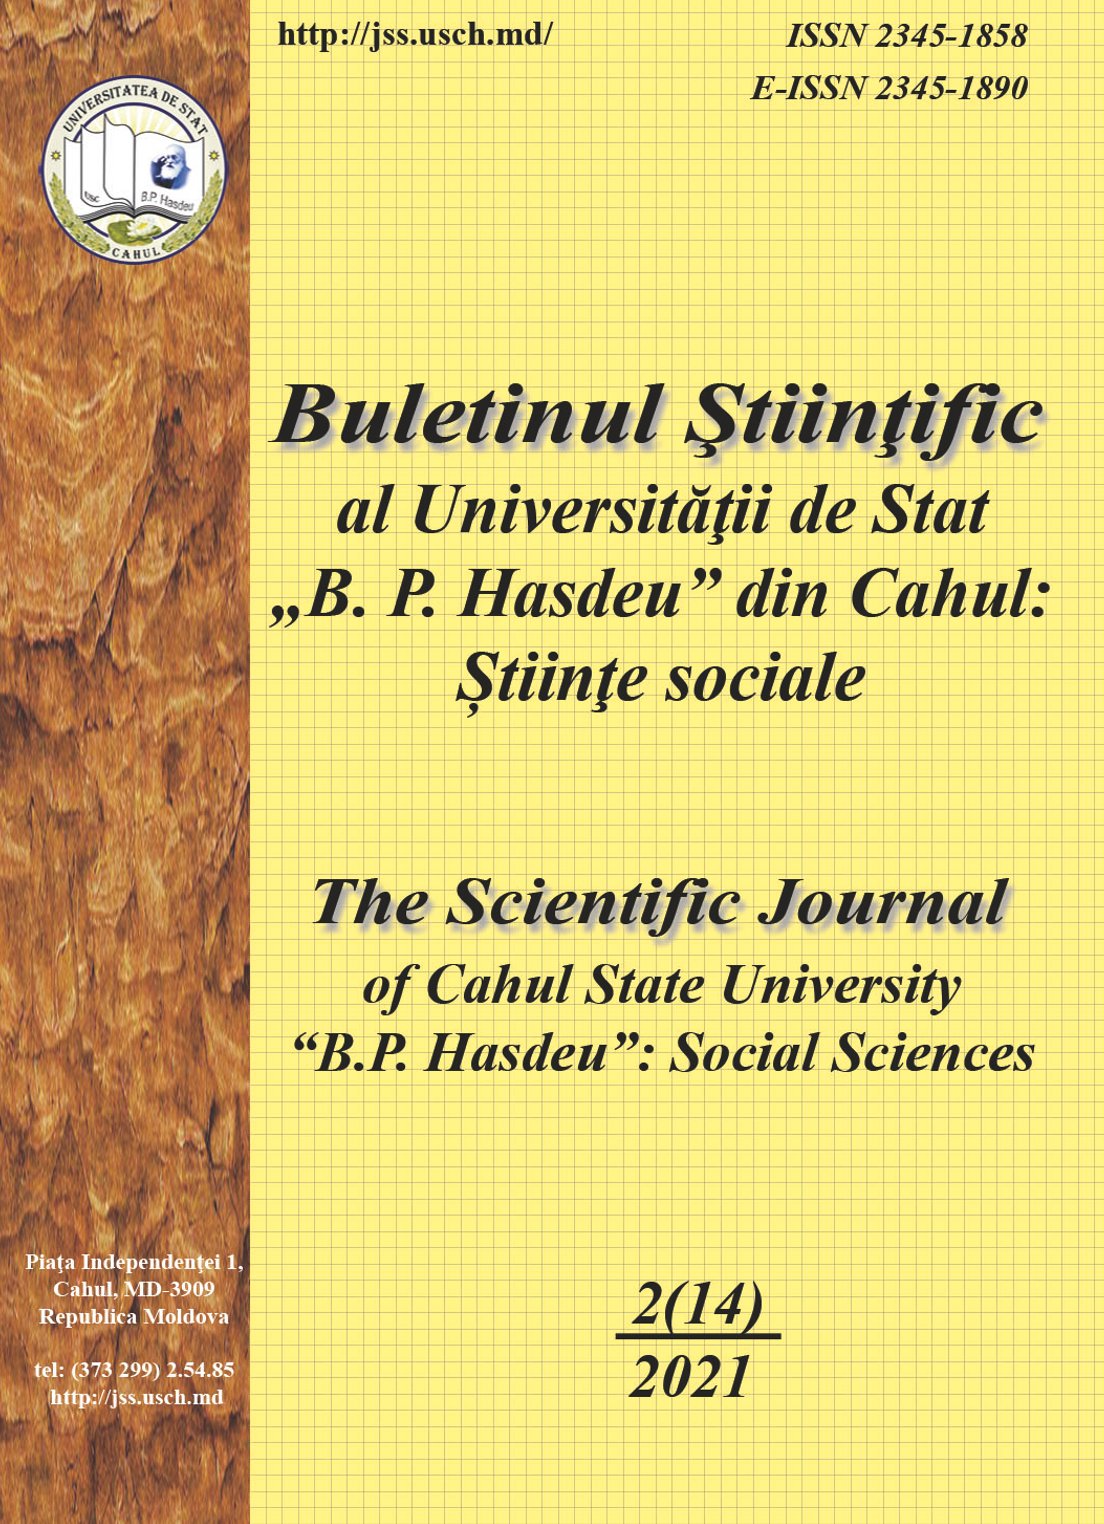 PARTICULARITIES OF THE INTERNATIONALIZATION PROCESS OF HIGHER EDUCATION IN REGIONAL UNIVERSITIES: THE CASE OF CAHUL STATE UNIVERSITY “B. P. HASDEU” Cover Image